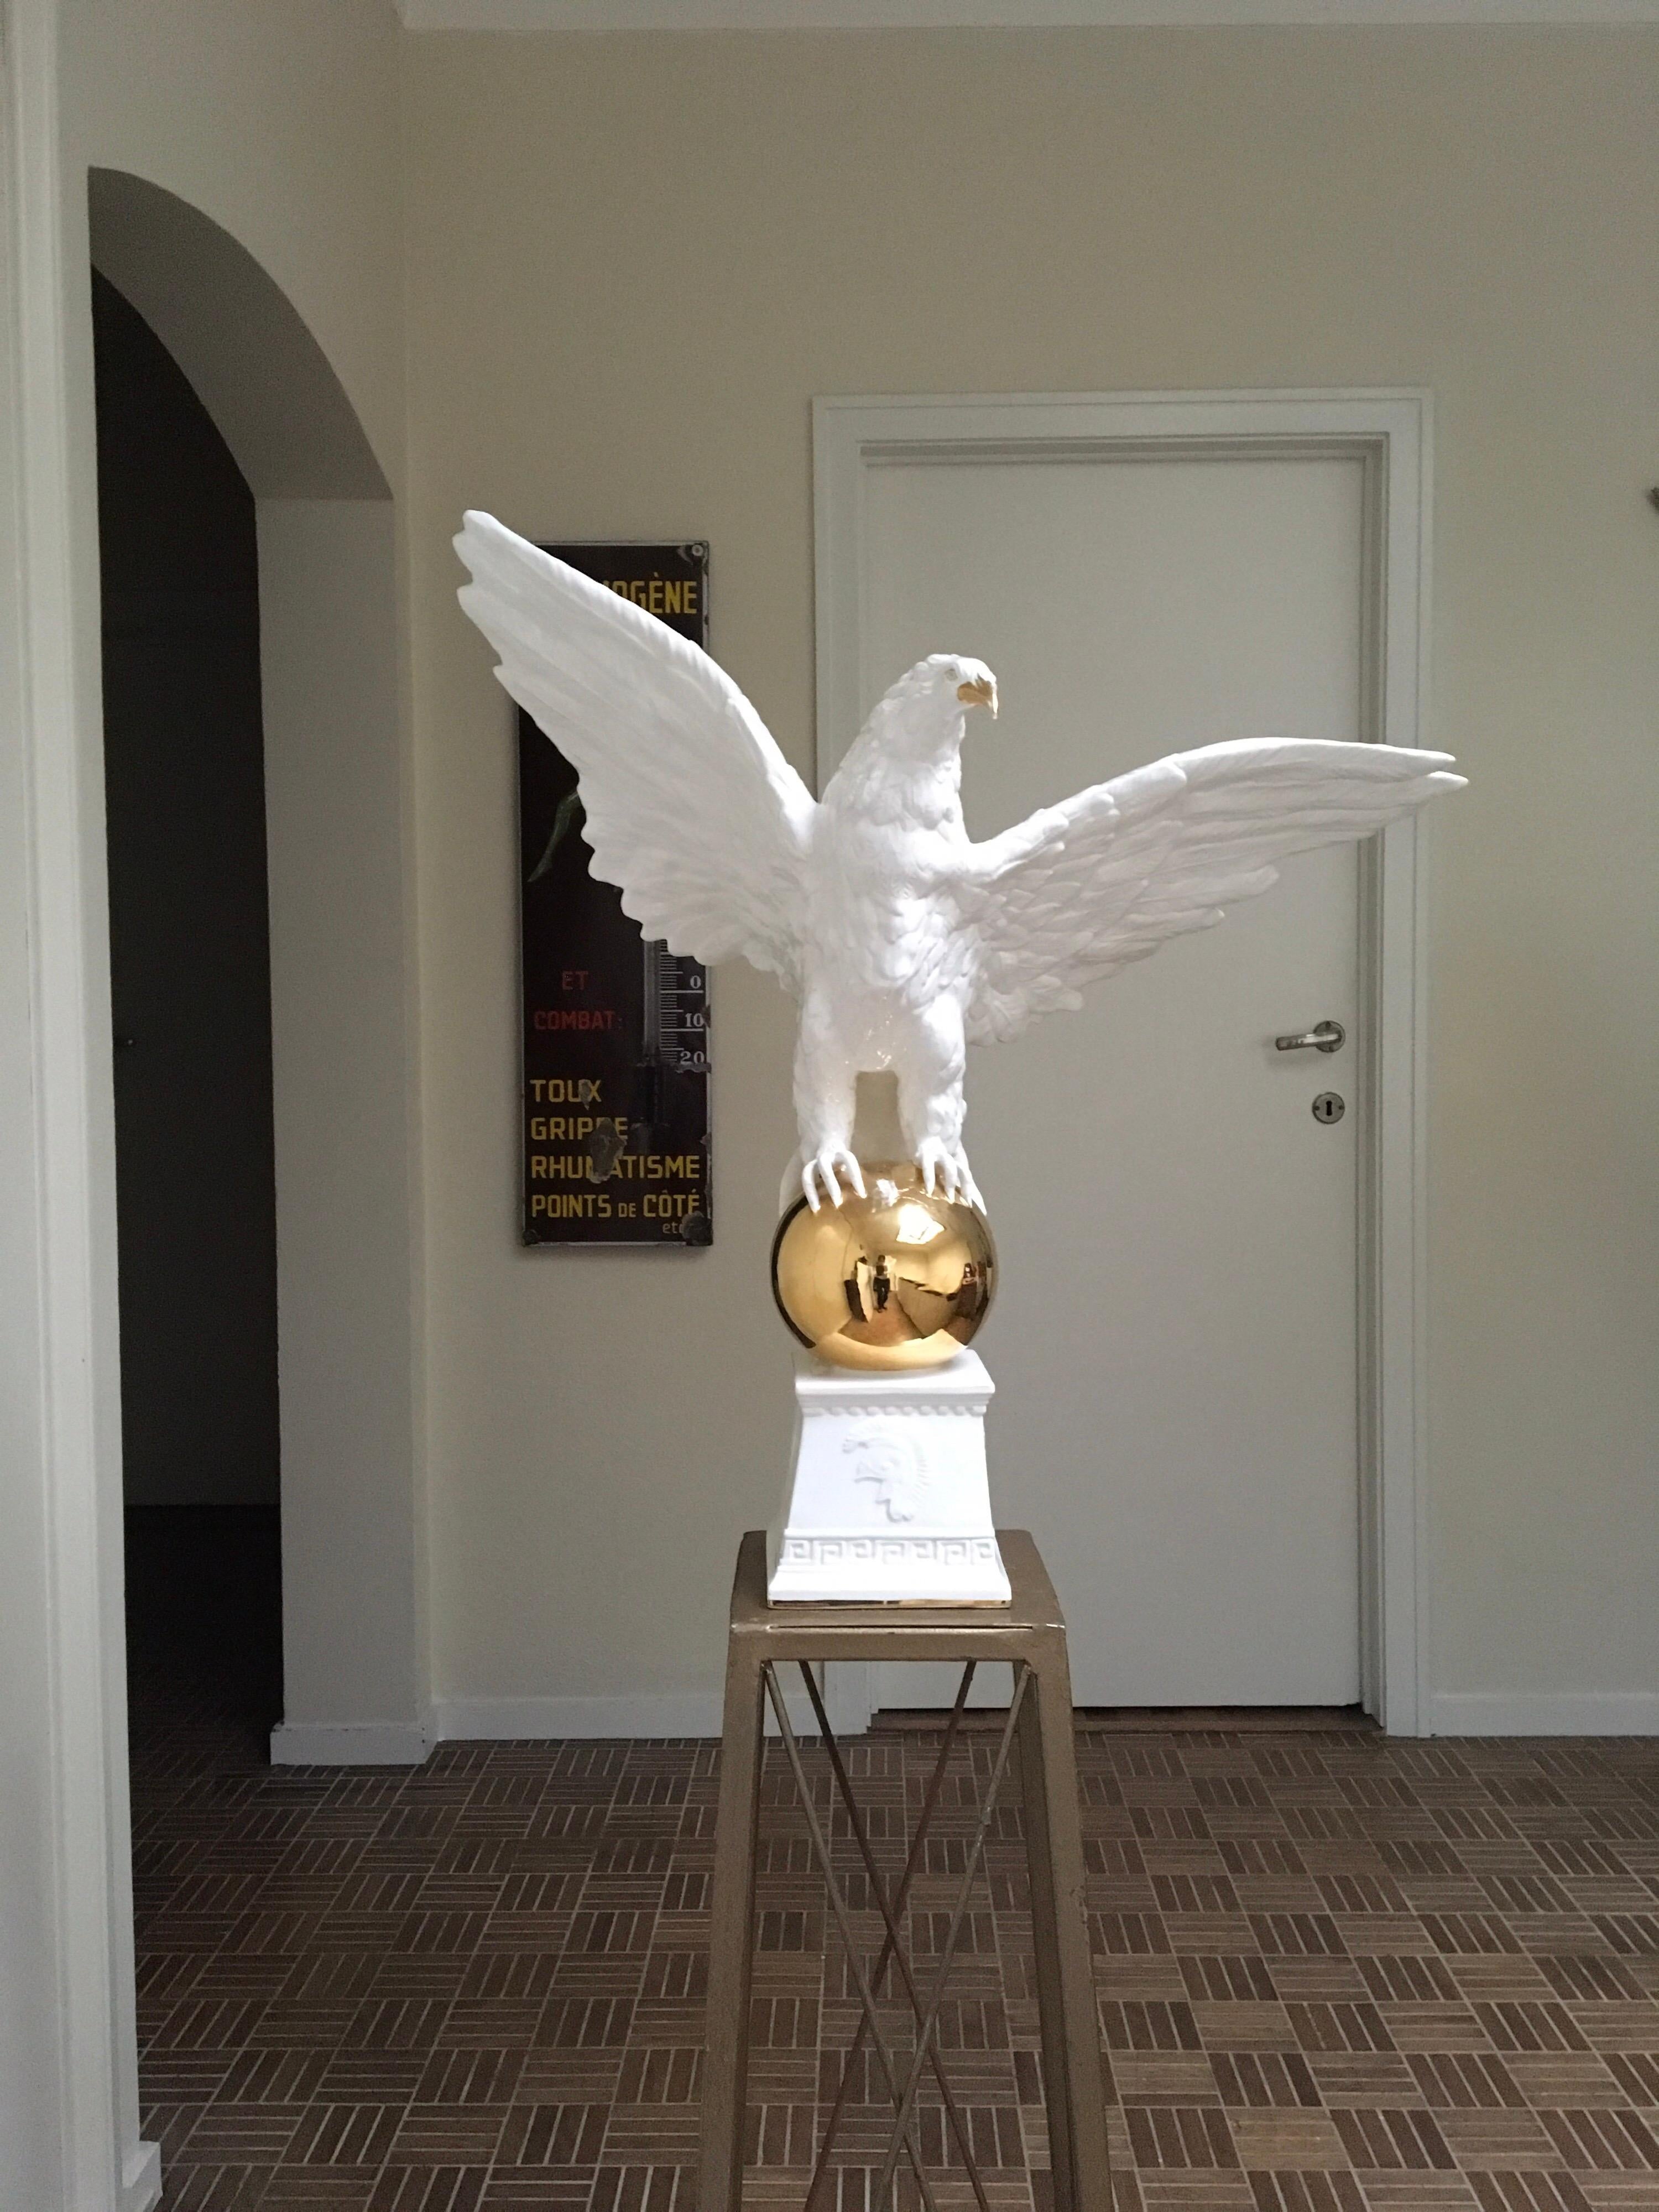 Impressive large Italian Eagle Statue - Eagle Sculpture with Wings Spread Open.
Made of White Ceramic with Hand-Decorated Golden Details and Accents.
Vintage Ceramics - Pottery Made in Italy , probably by Bassano.
This Animal statue - Bird Sculpture